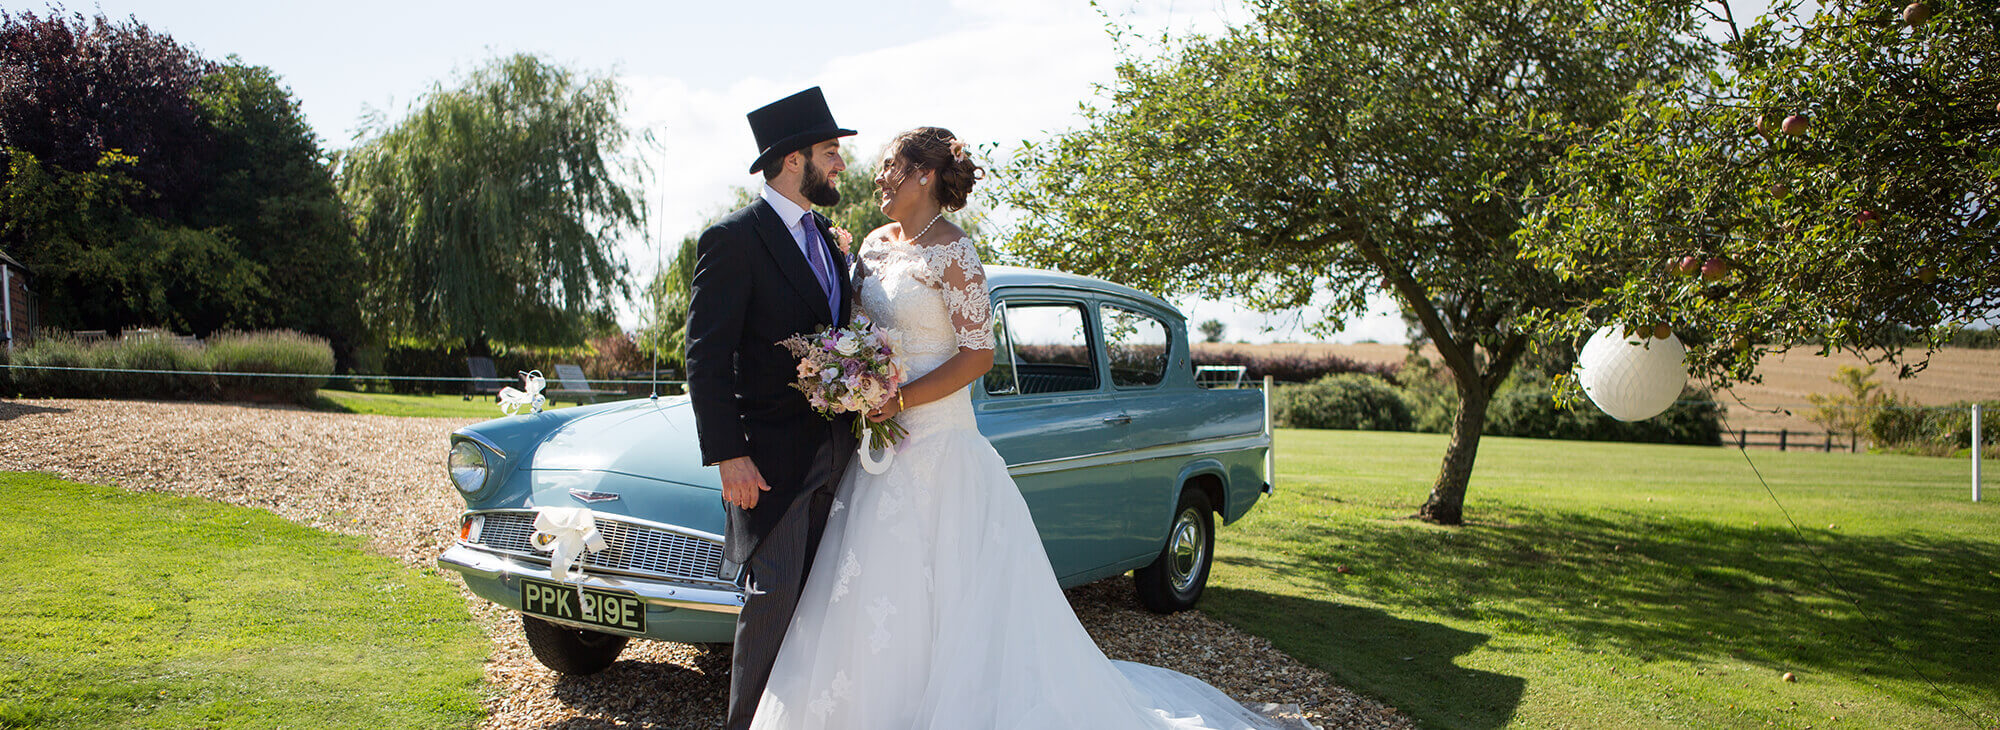 Happy newlyweds smiling in front of vintage car